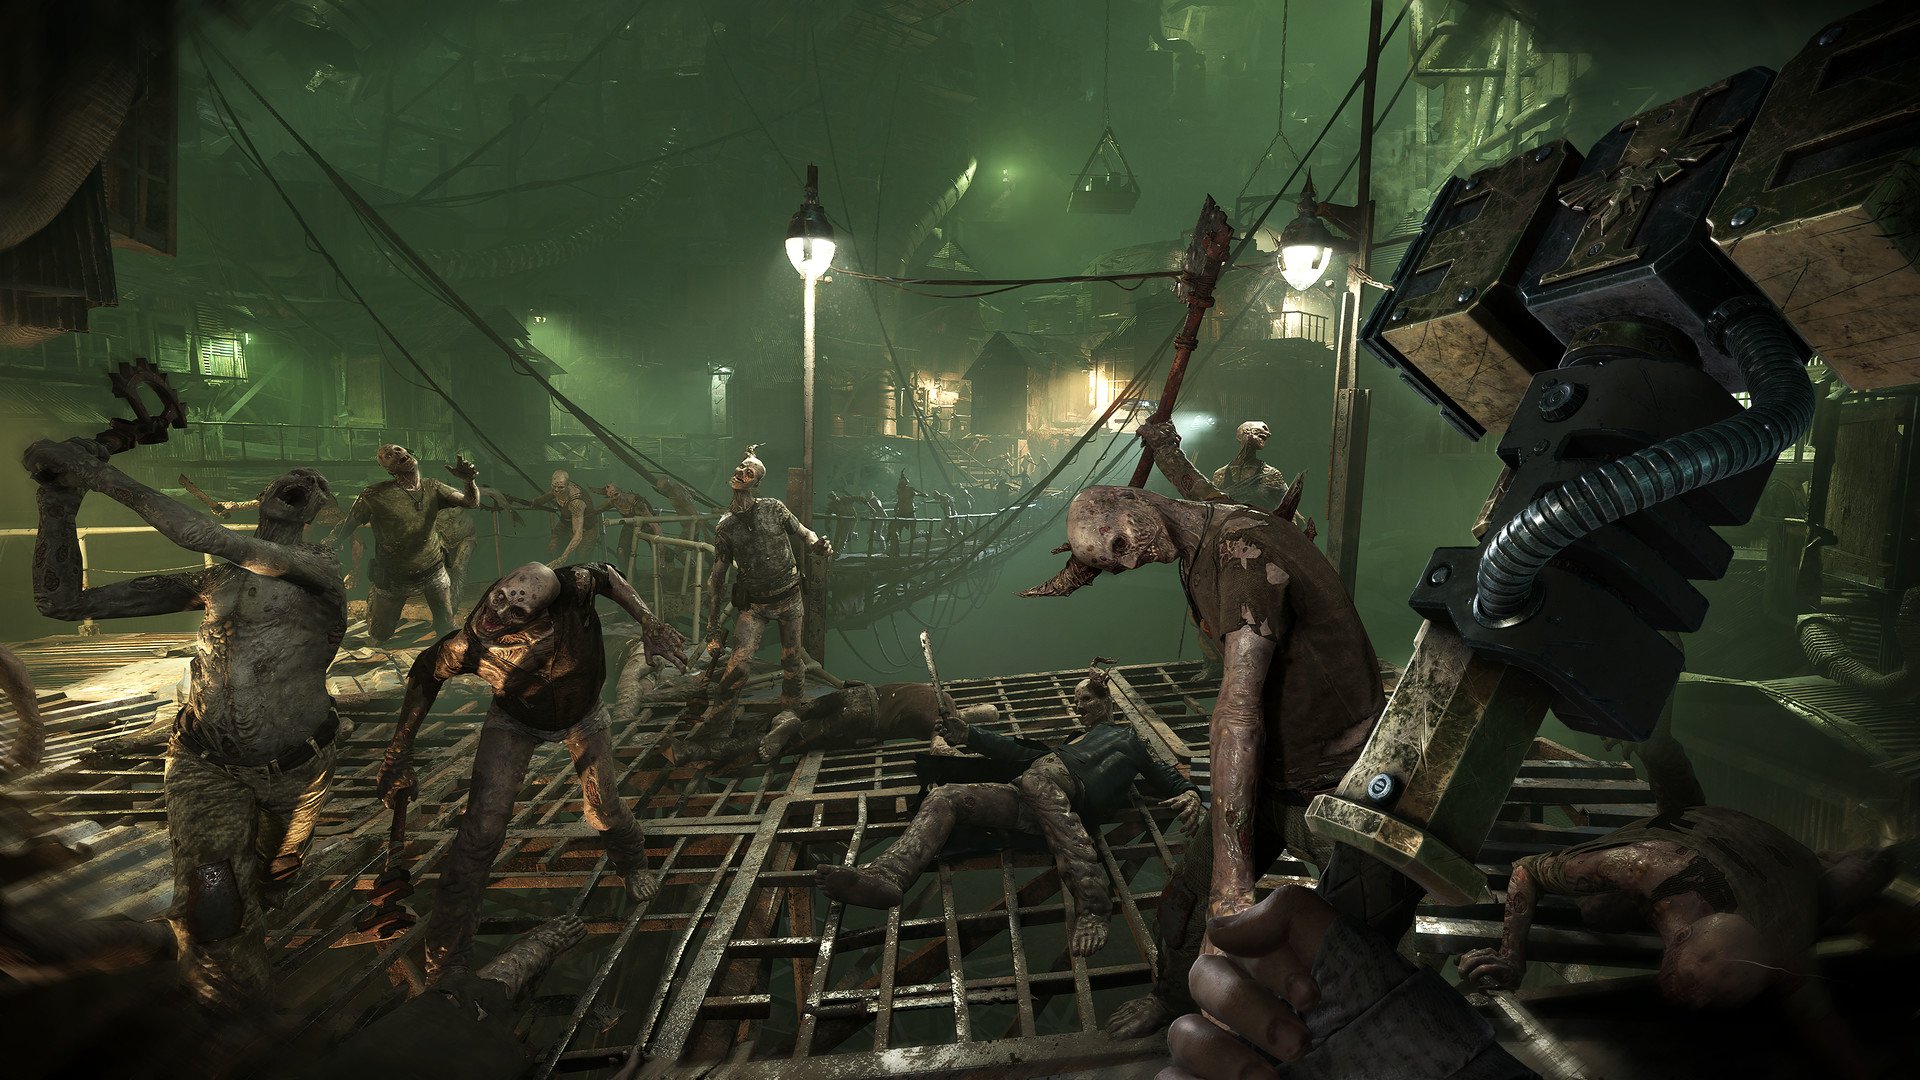 Undead creatures approaching a player with a hammer